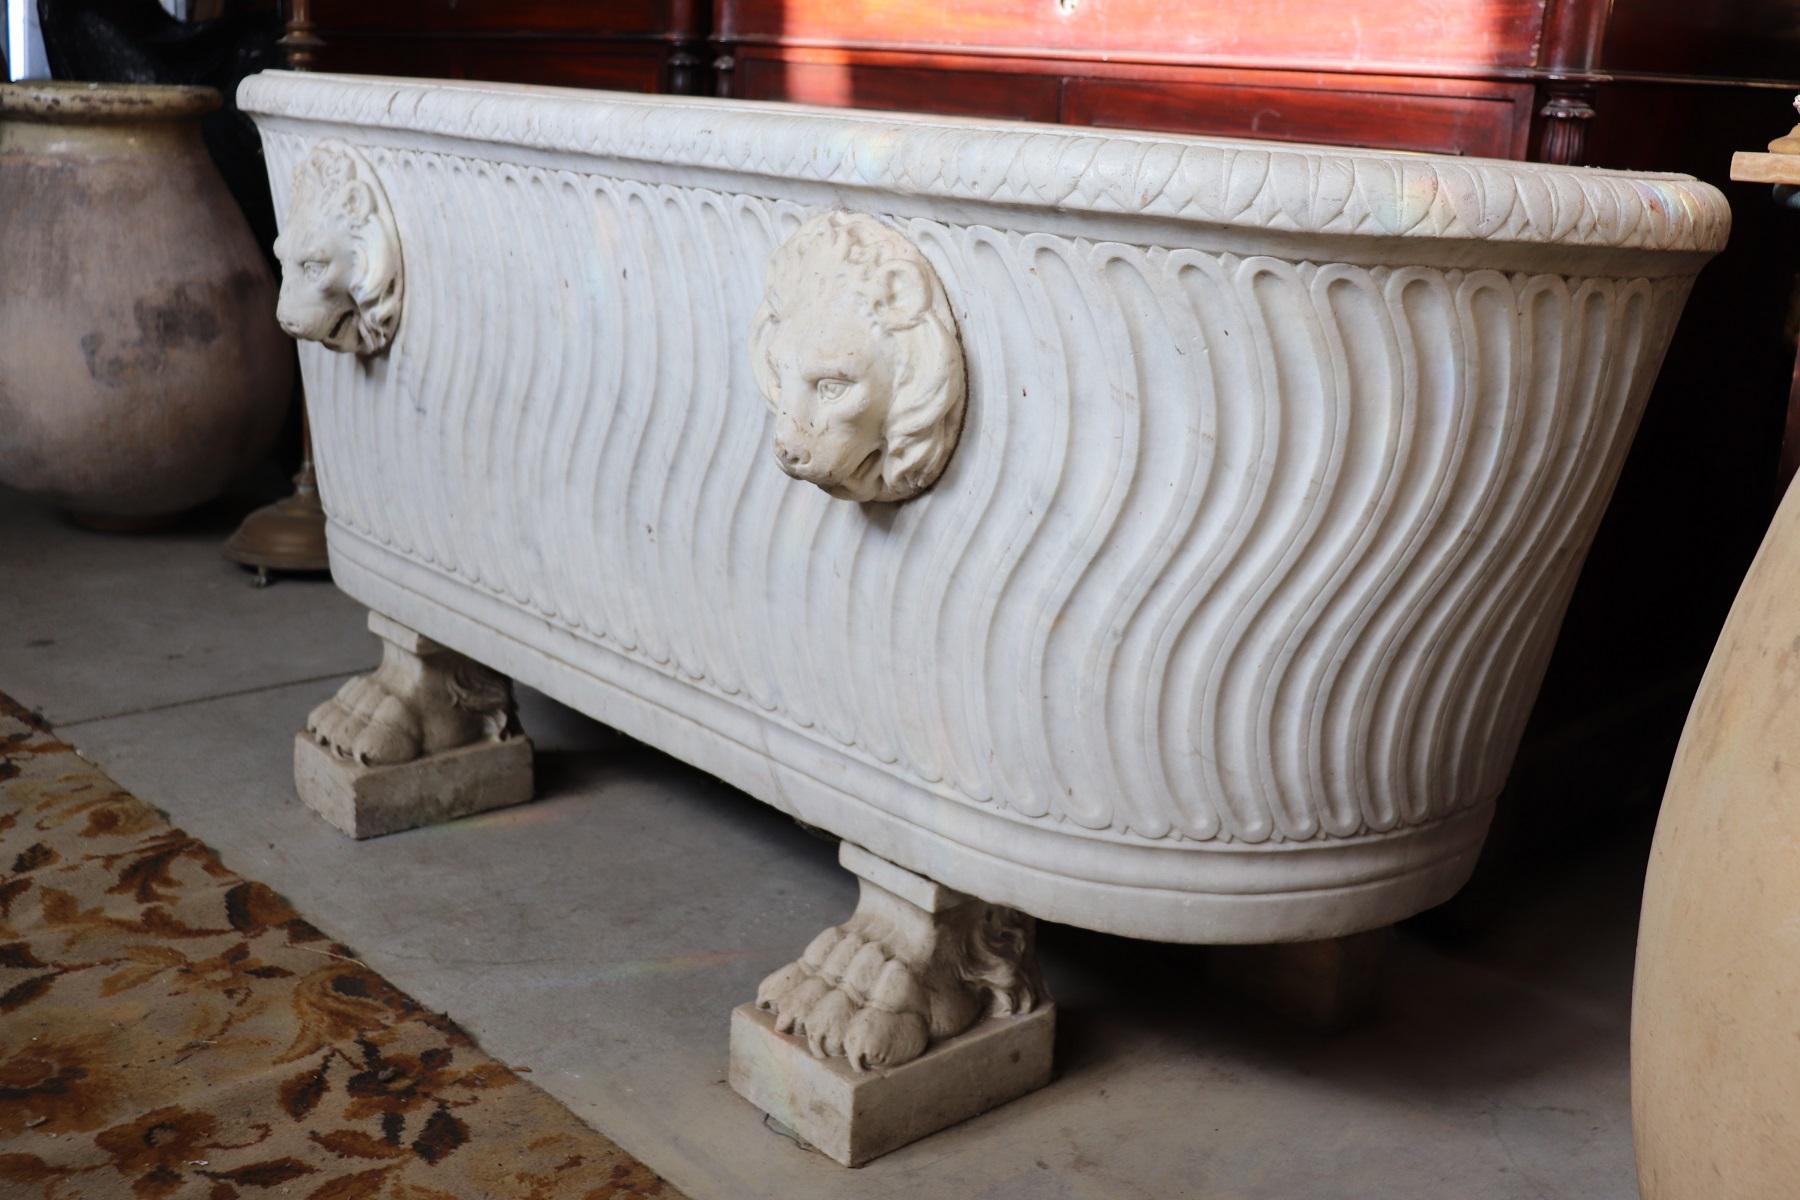 Rare antique bathtub Napoleon's Italian Empire, 1800s in white Carrara marble with carved decorations. The bathtub is presented to you as we found it with all the fascinating signs of the time. This item is really special and rare perfect for a